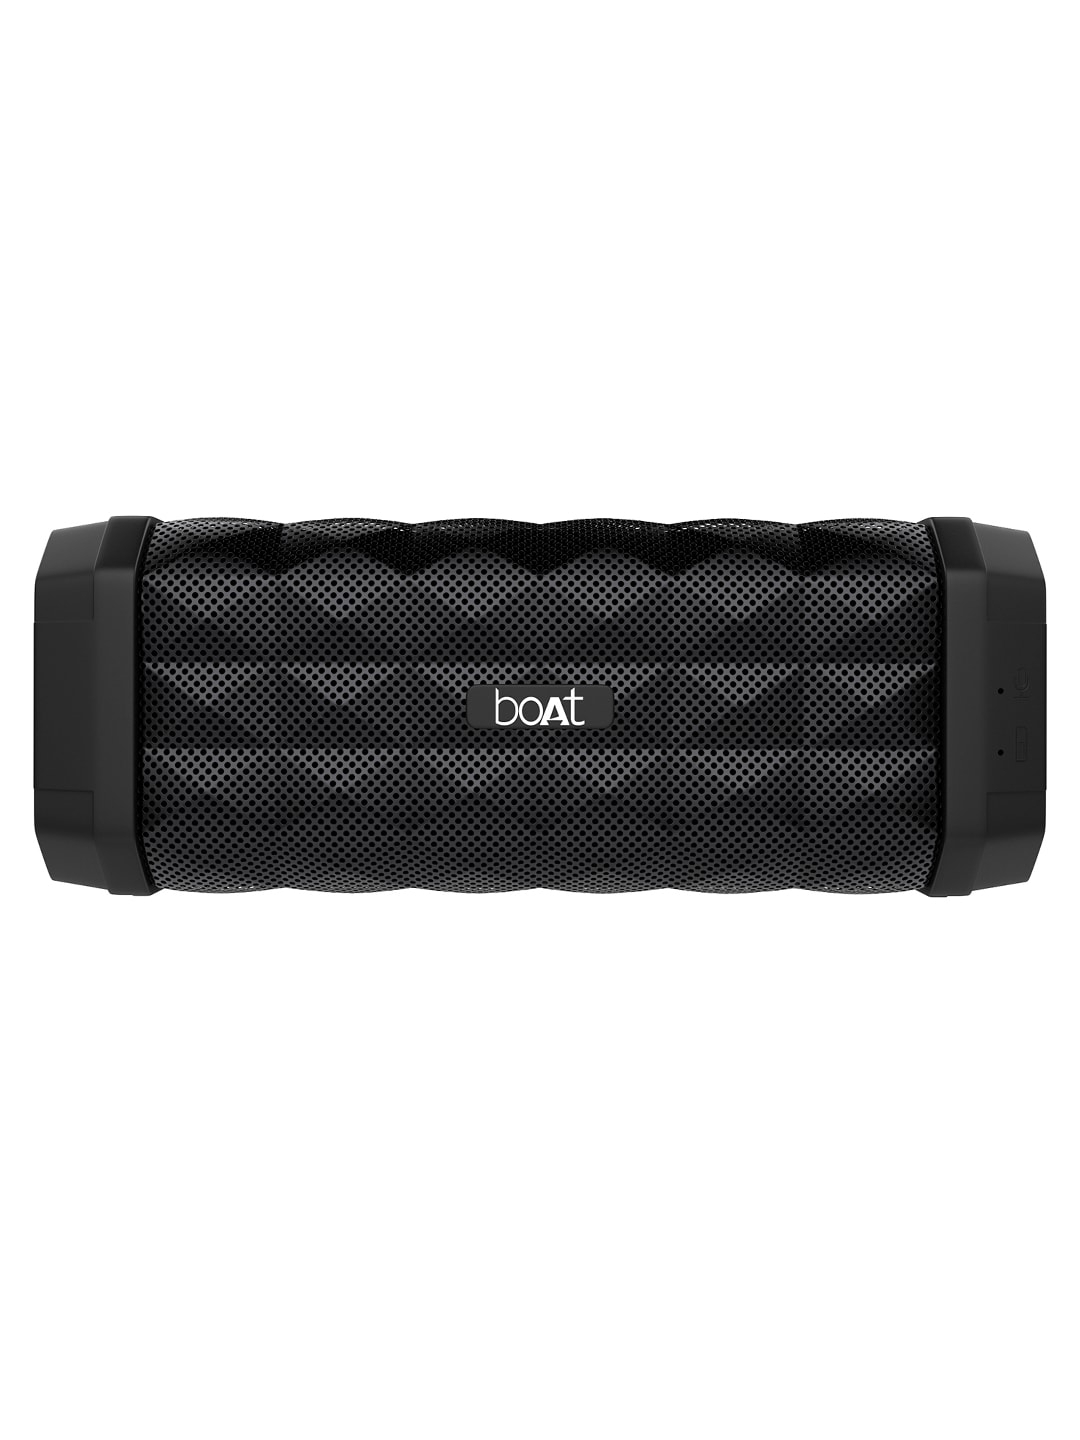 boAt Stone 650 10W Charcoal Black Stereo Wireless Speaker with IPX5 & Up to 7H Playtime Price in India